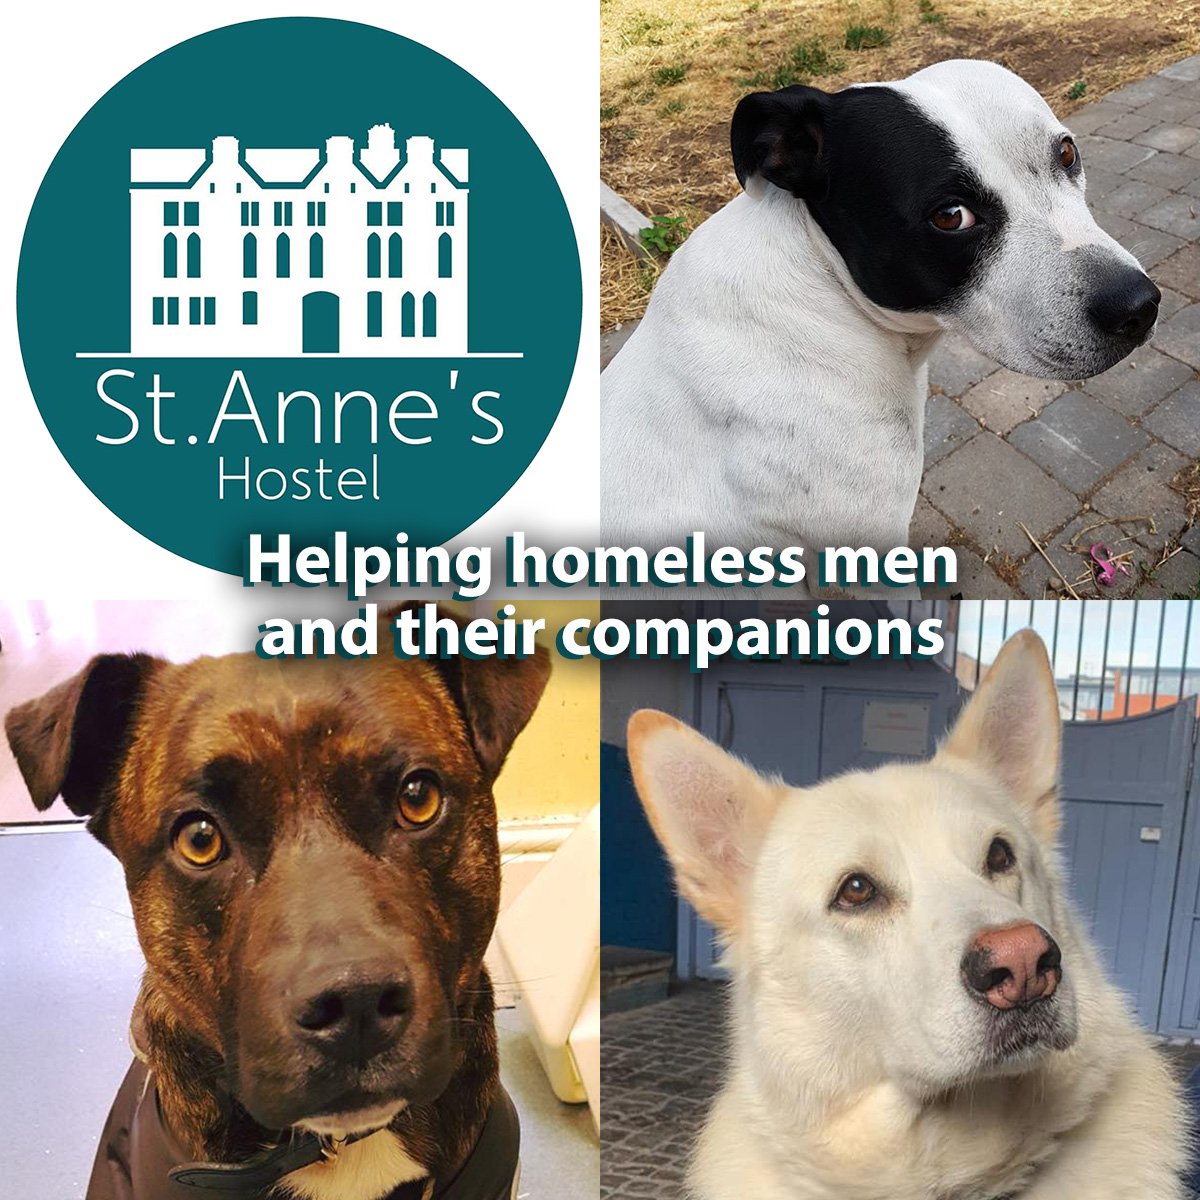 We love our furry residents at St Anne's and try our absolute best to help them and their owners find a way to get back on their feet. We can't do that without the support we receive from donations. Find out how you can help here: stannesbirmingham.org.uk/donations/